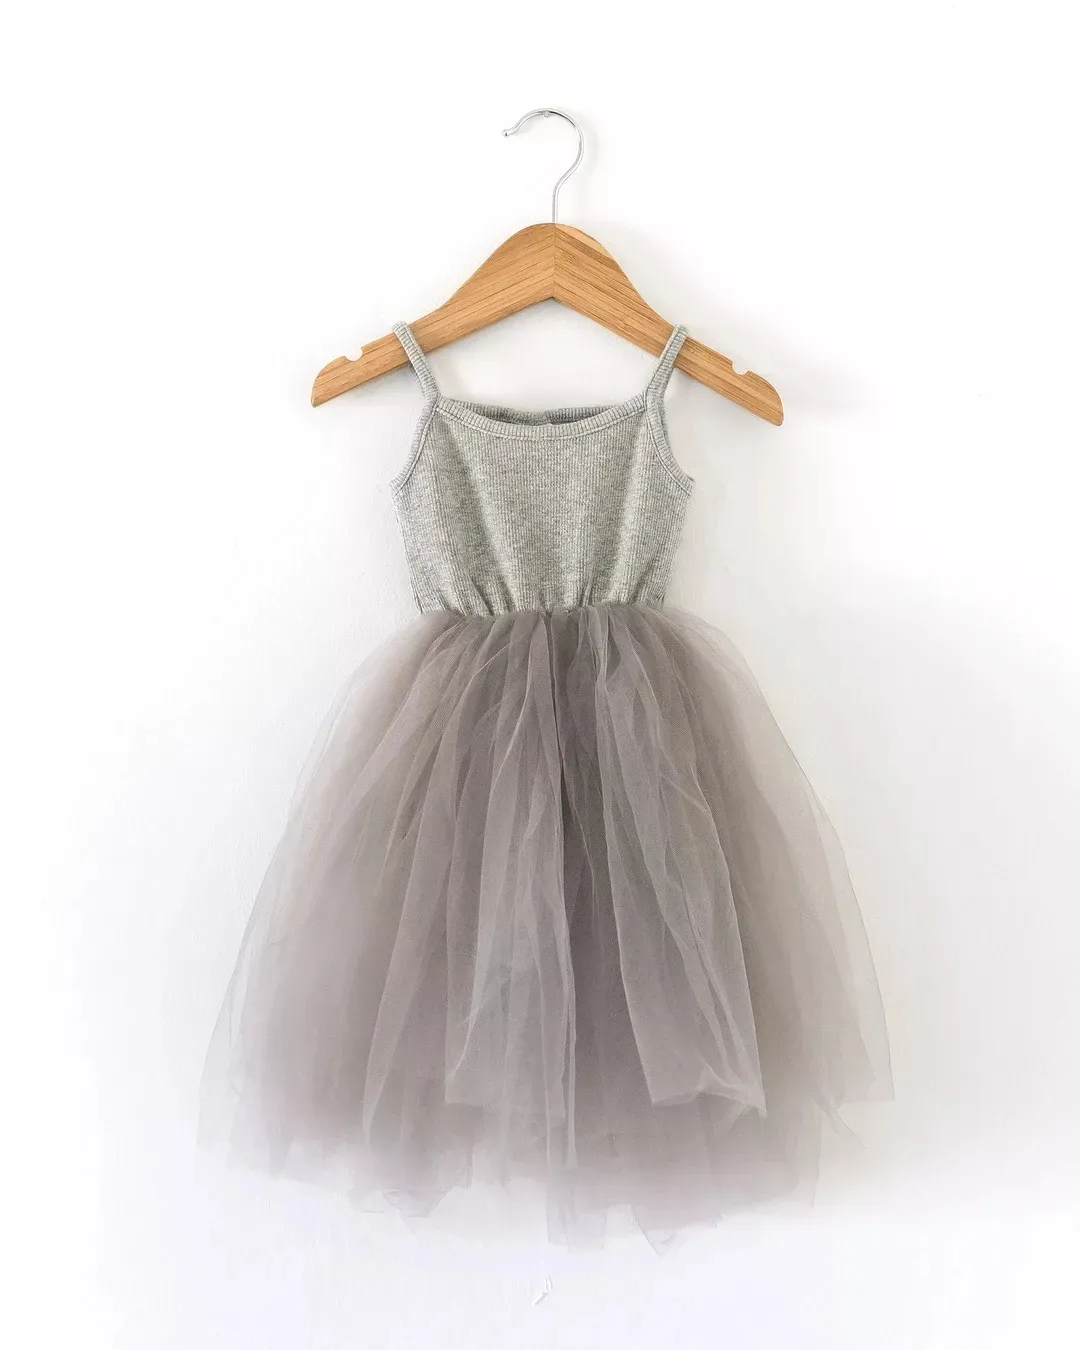 Ins baby girls dress summer ribbed strap sleeveless top patchwork lace tutu dress party toddler princess dress